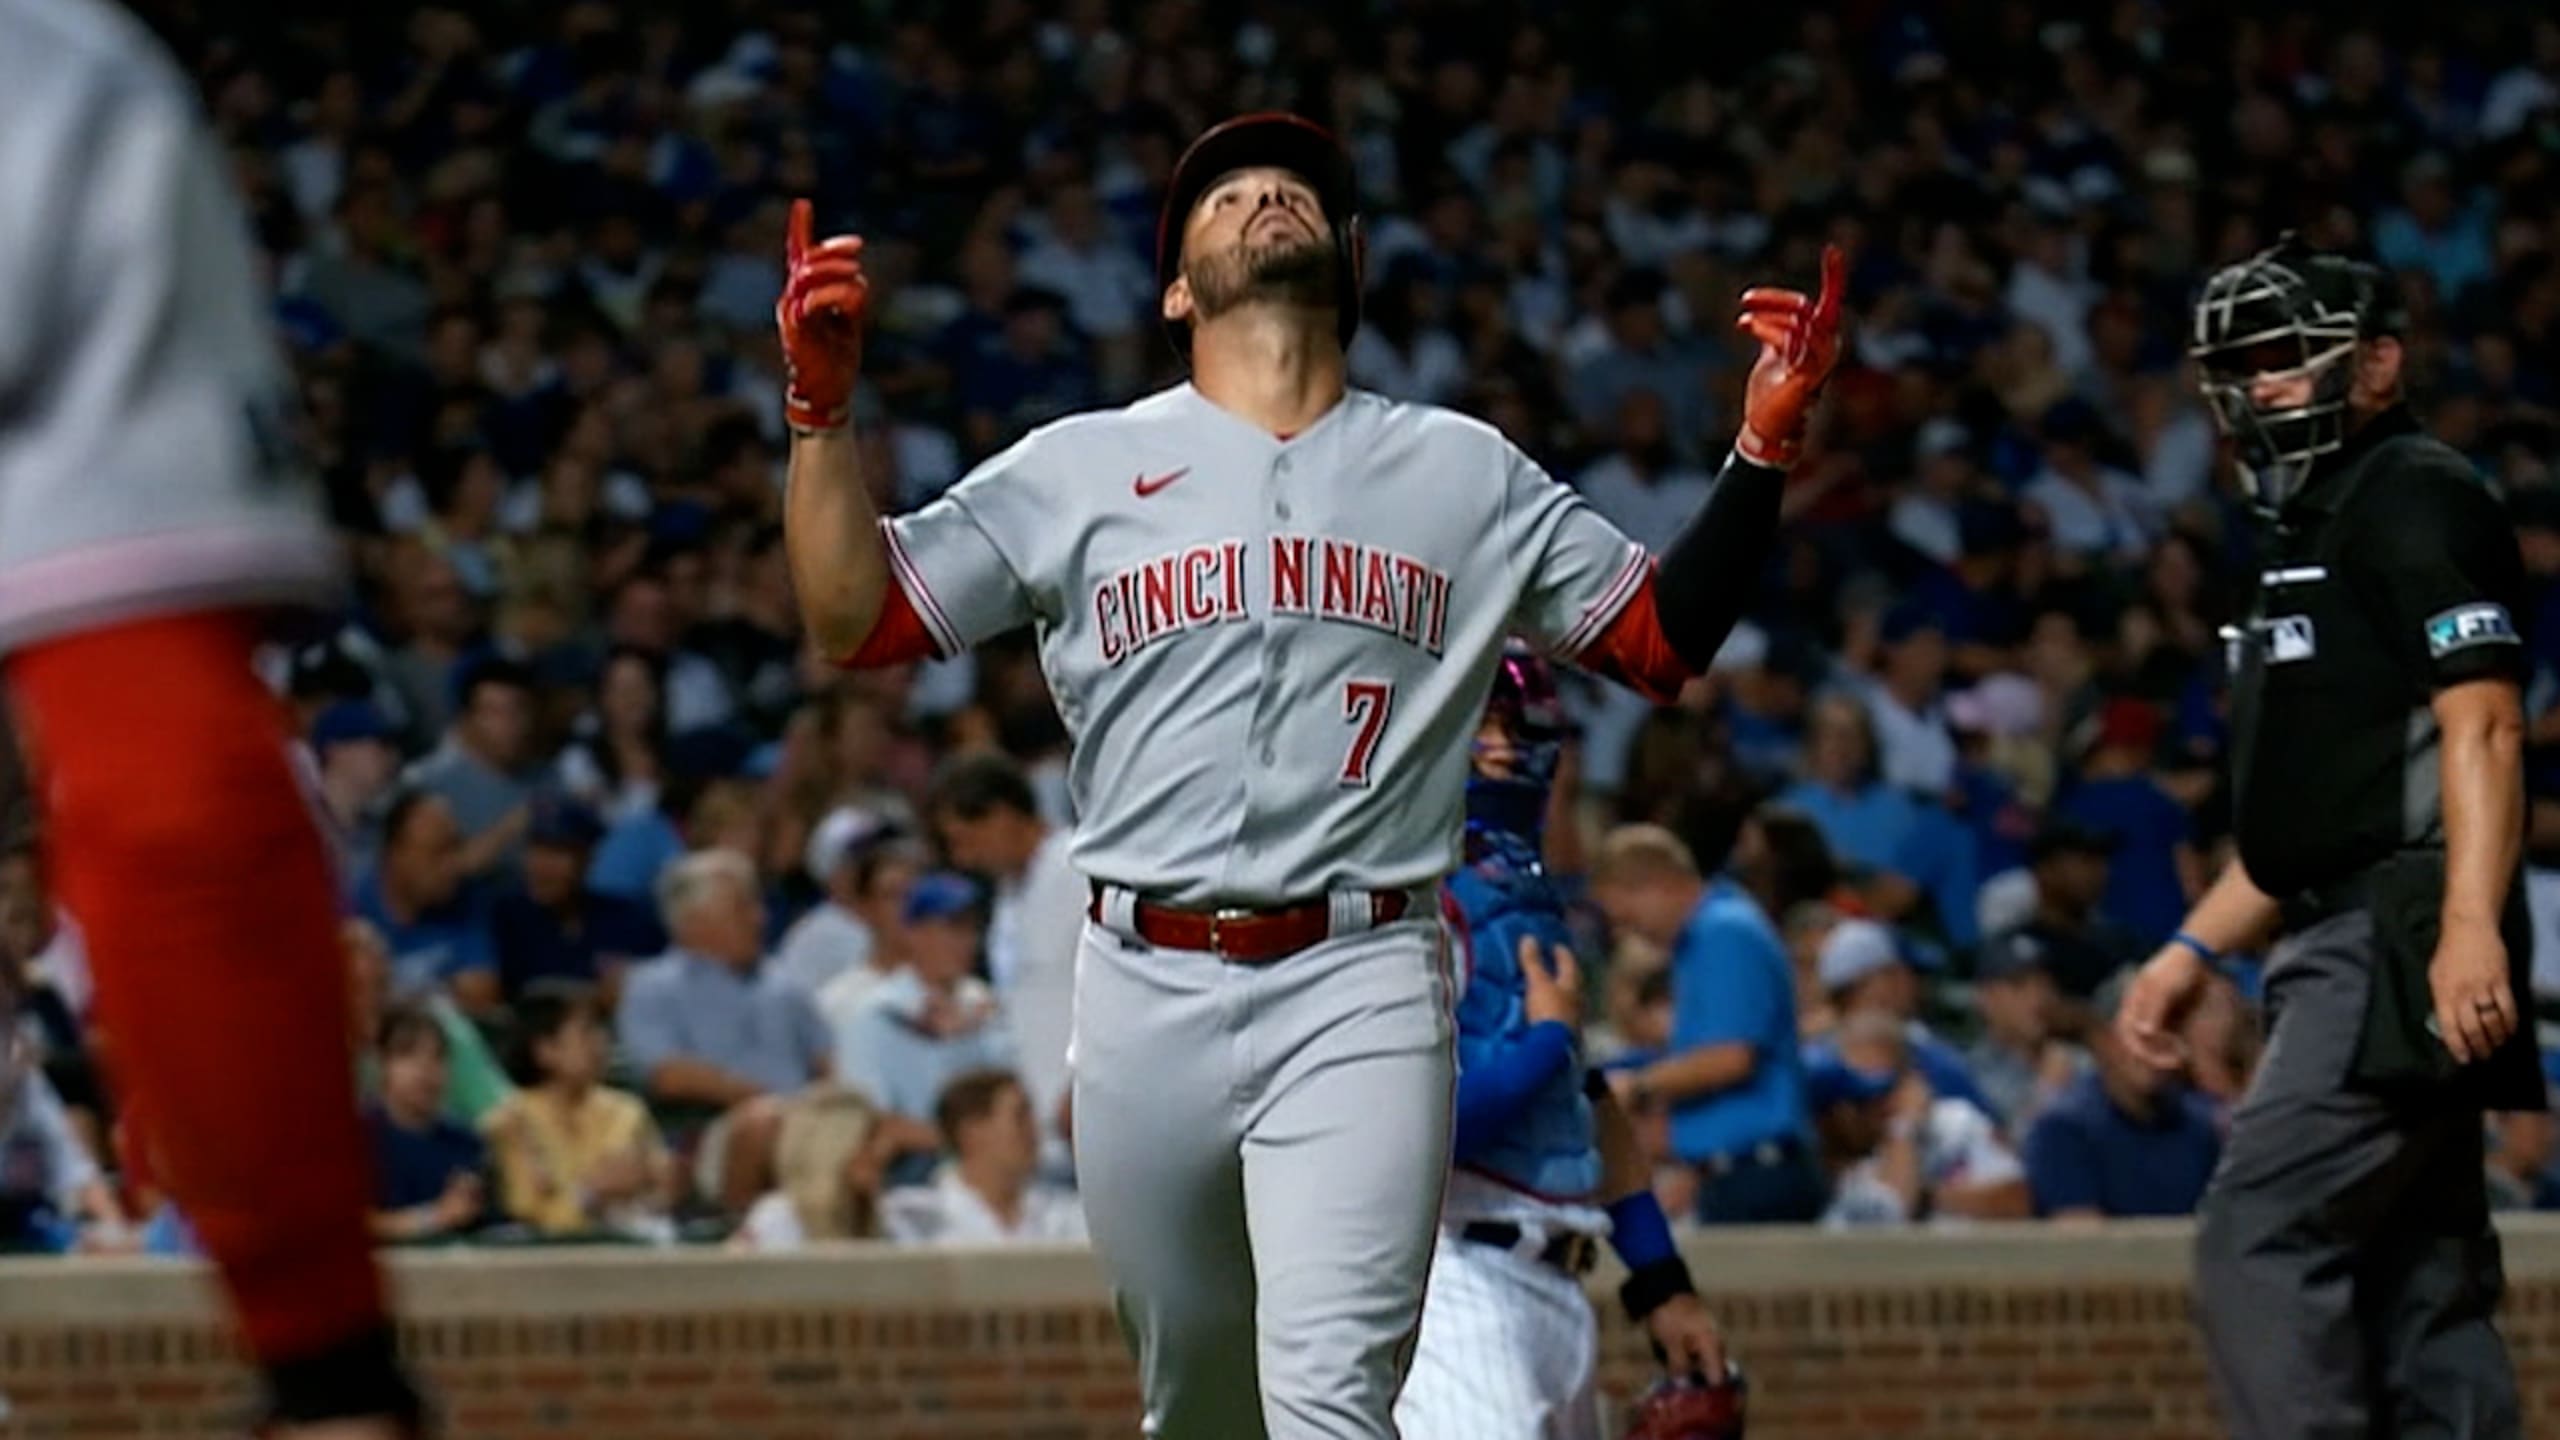 Joey Votto not ready yet to join the Cincinnati Reds - Redleg Nation